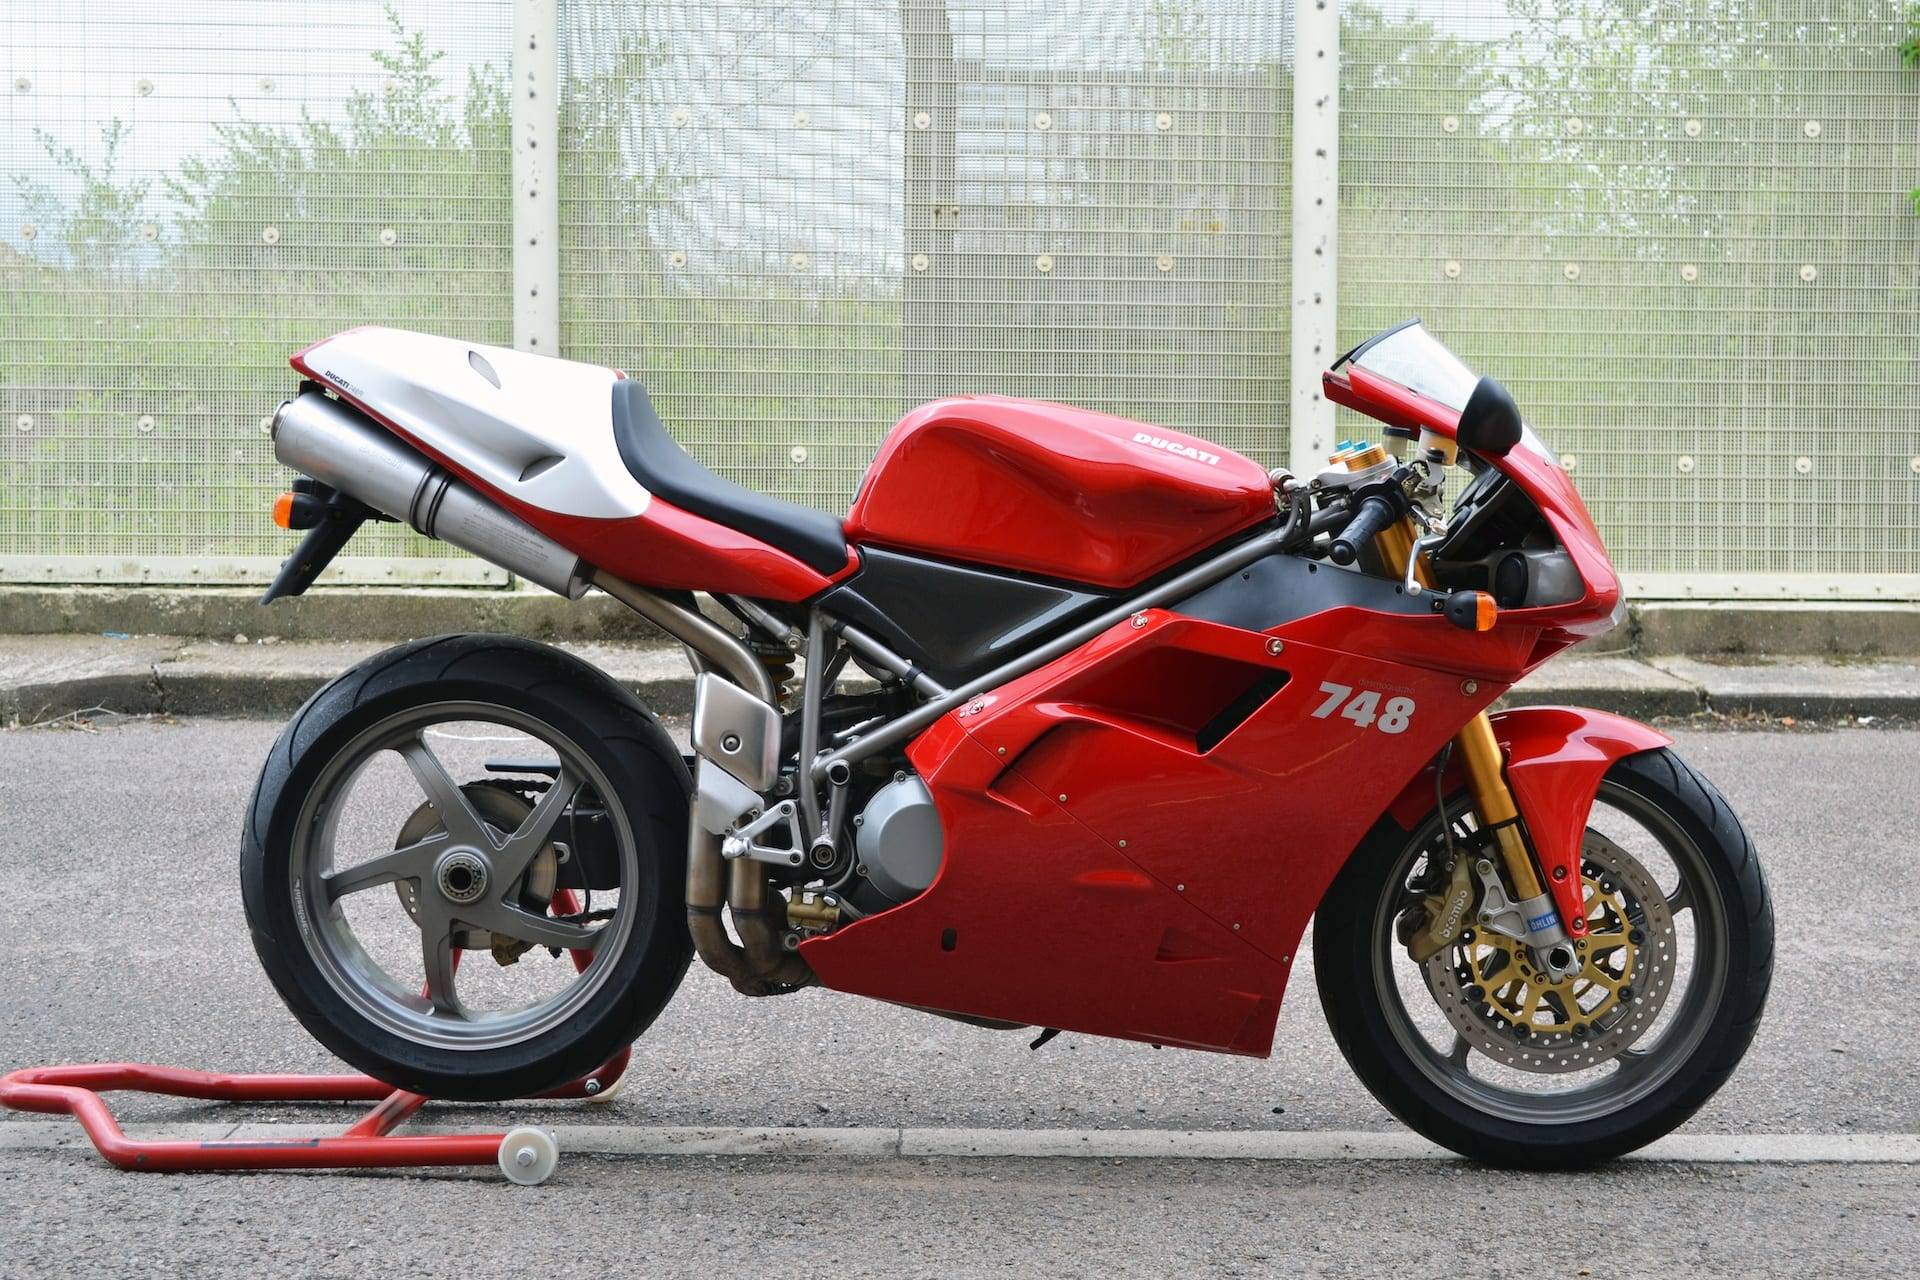 Ducati 748 2002 | about motorcycles